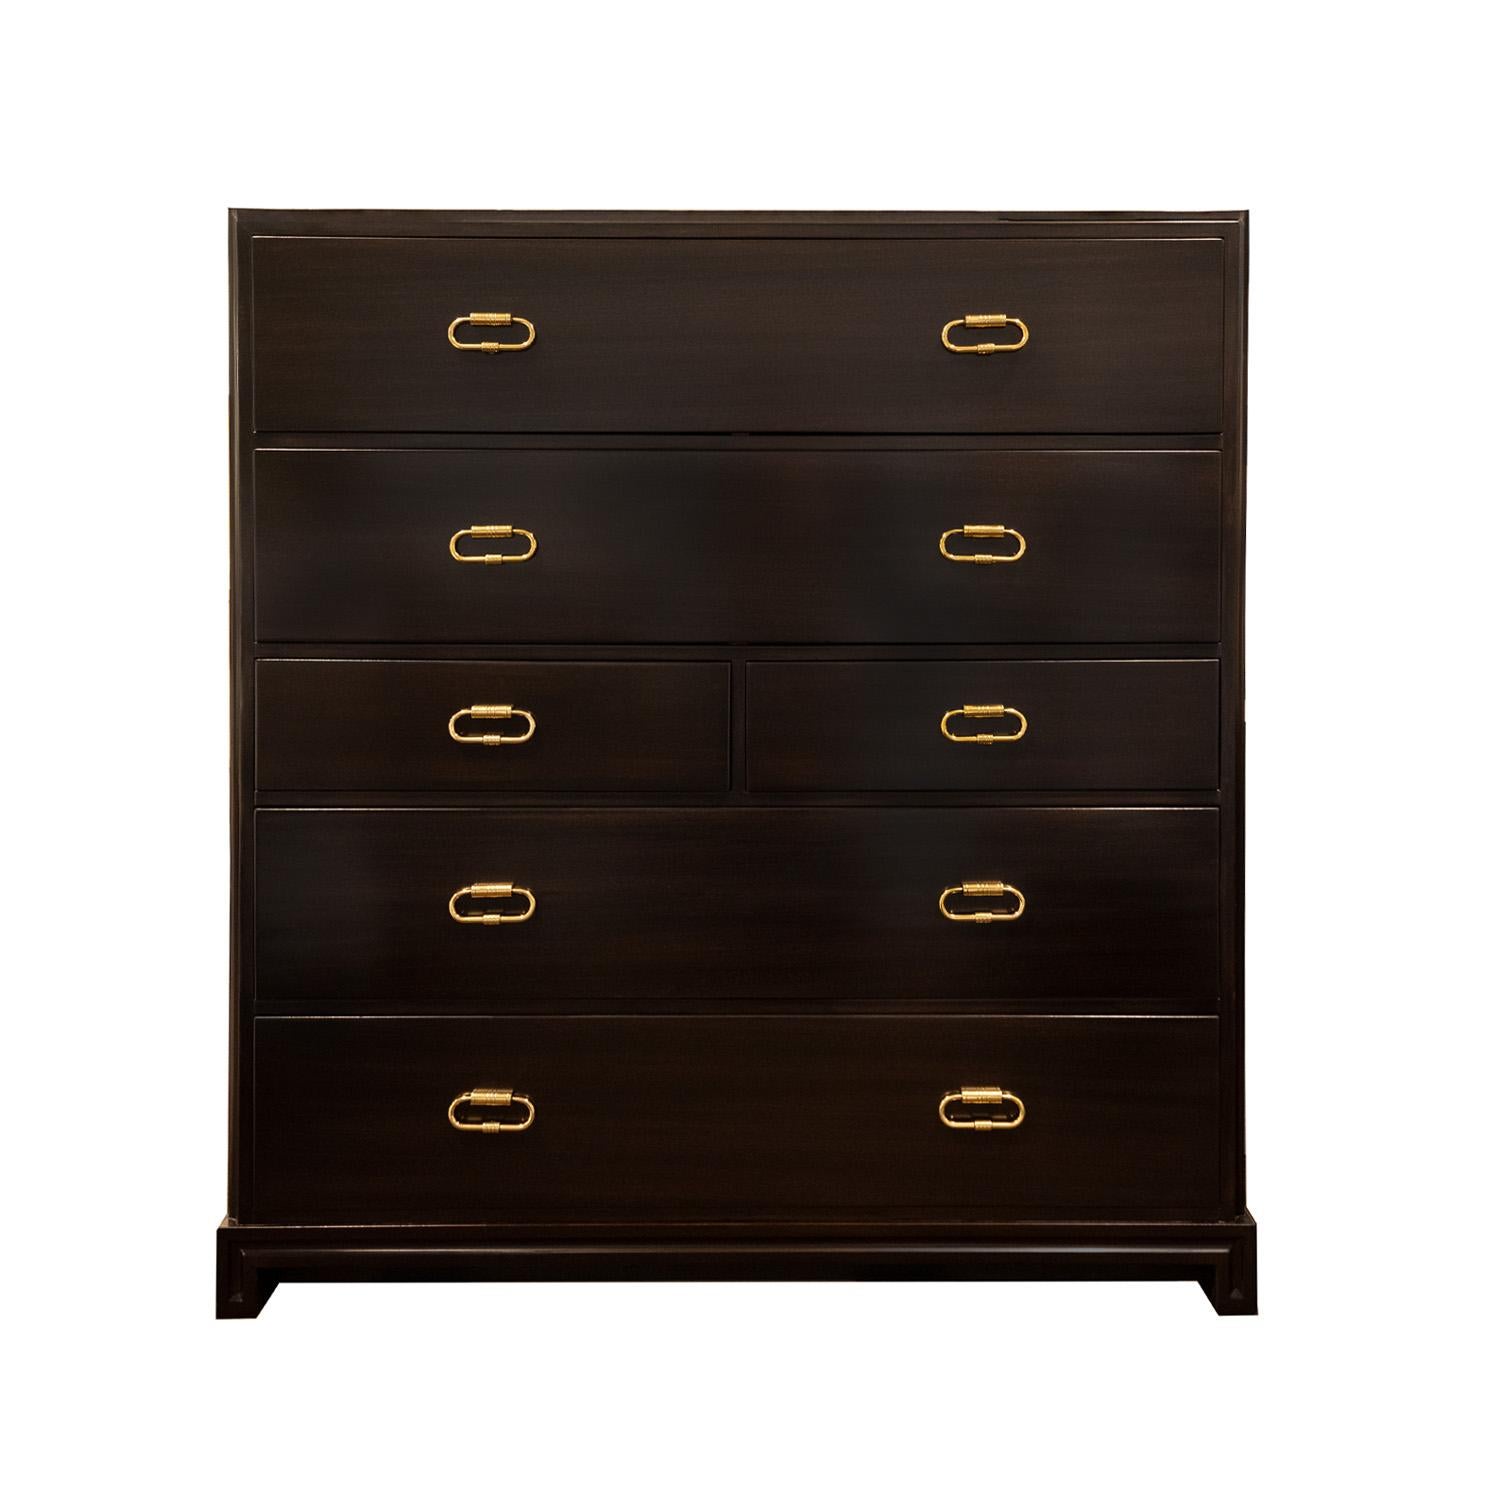 Superbly crafted high chest of drawers in mahogany with etched brass pulls by Tommi Parzinger for Parzinger Originals, American 1950's (signed 